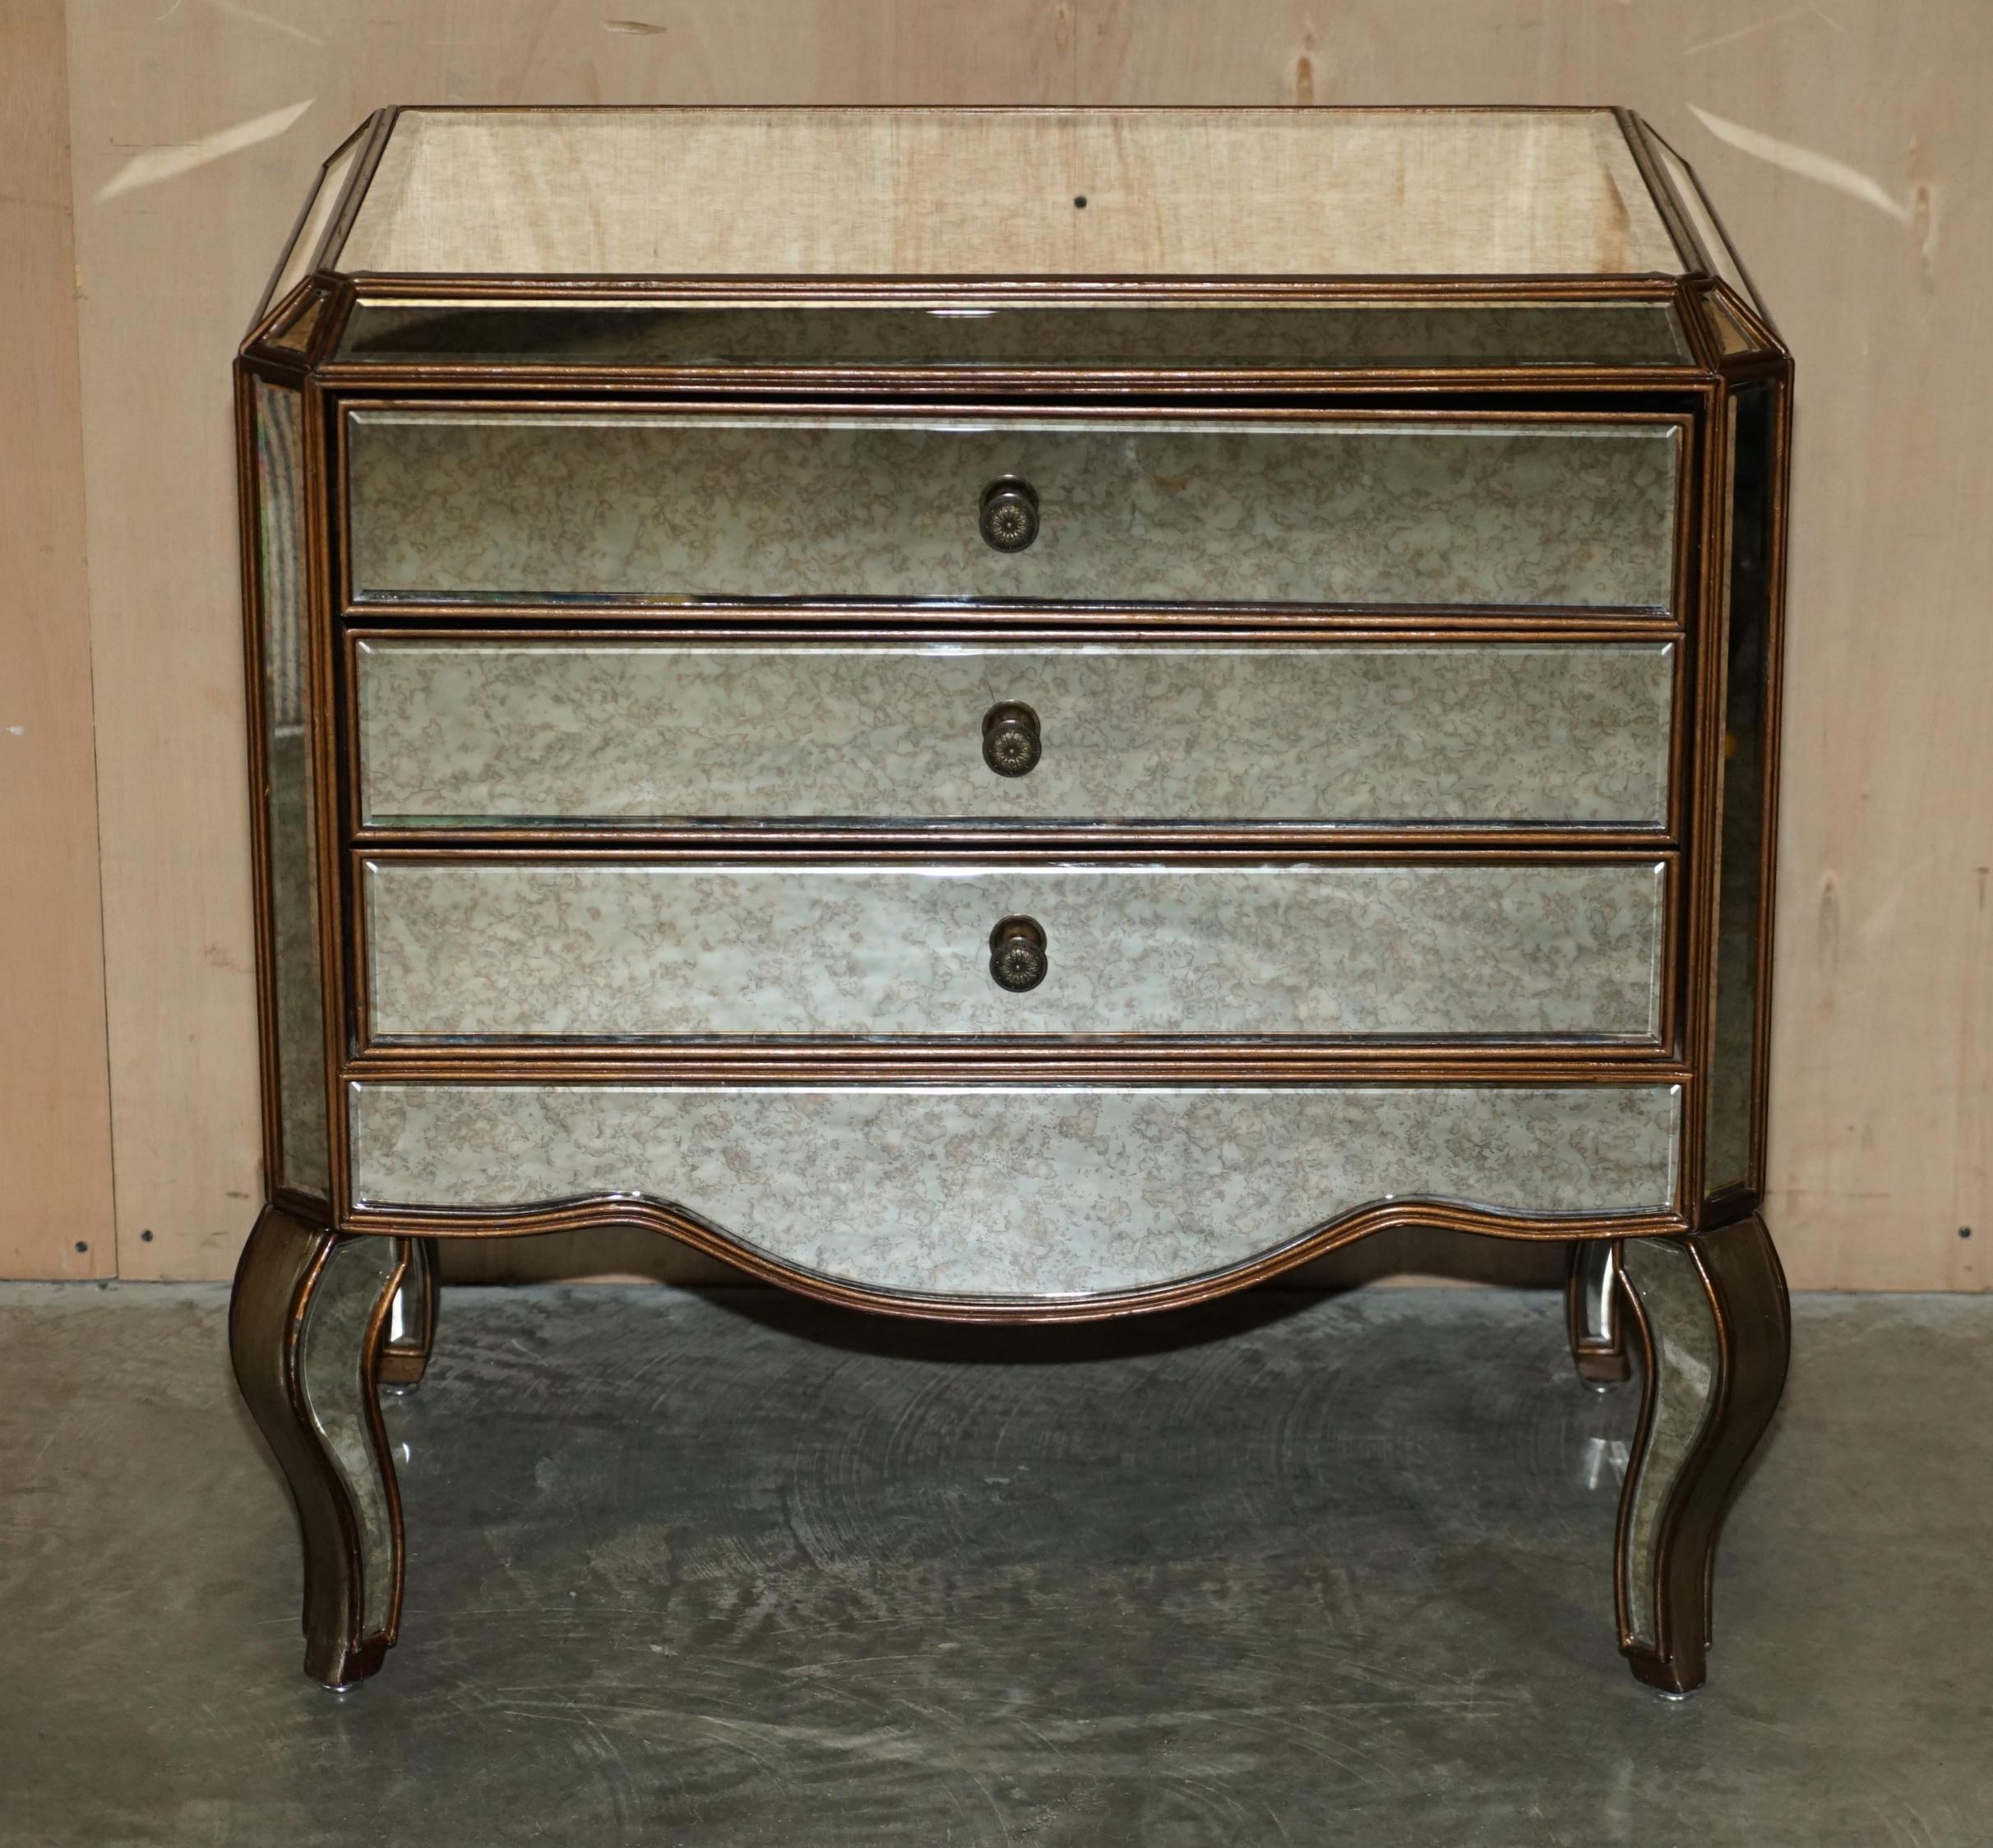 We are delighted to offer for sale this exquisite pair of antiqued glass Venetian Italian chests of drawers

These are not bedside table sized but chest of drawers size or extra large nightstands when being used in a bedroom context, for a living